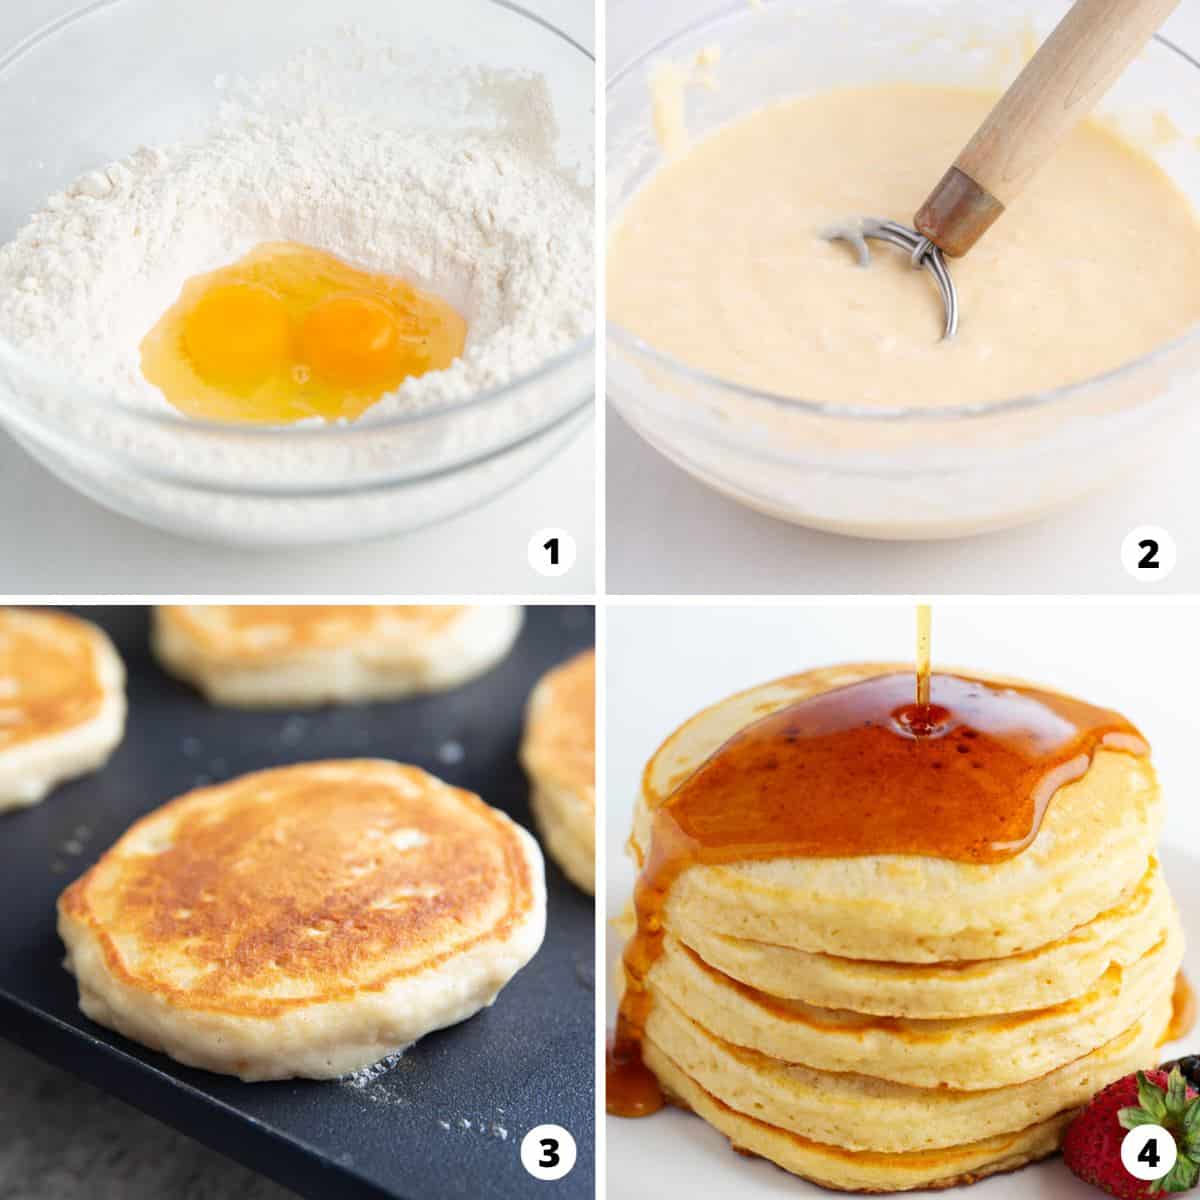 Showing how to make pancakes in a 4 step collage.